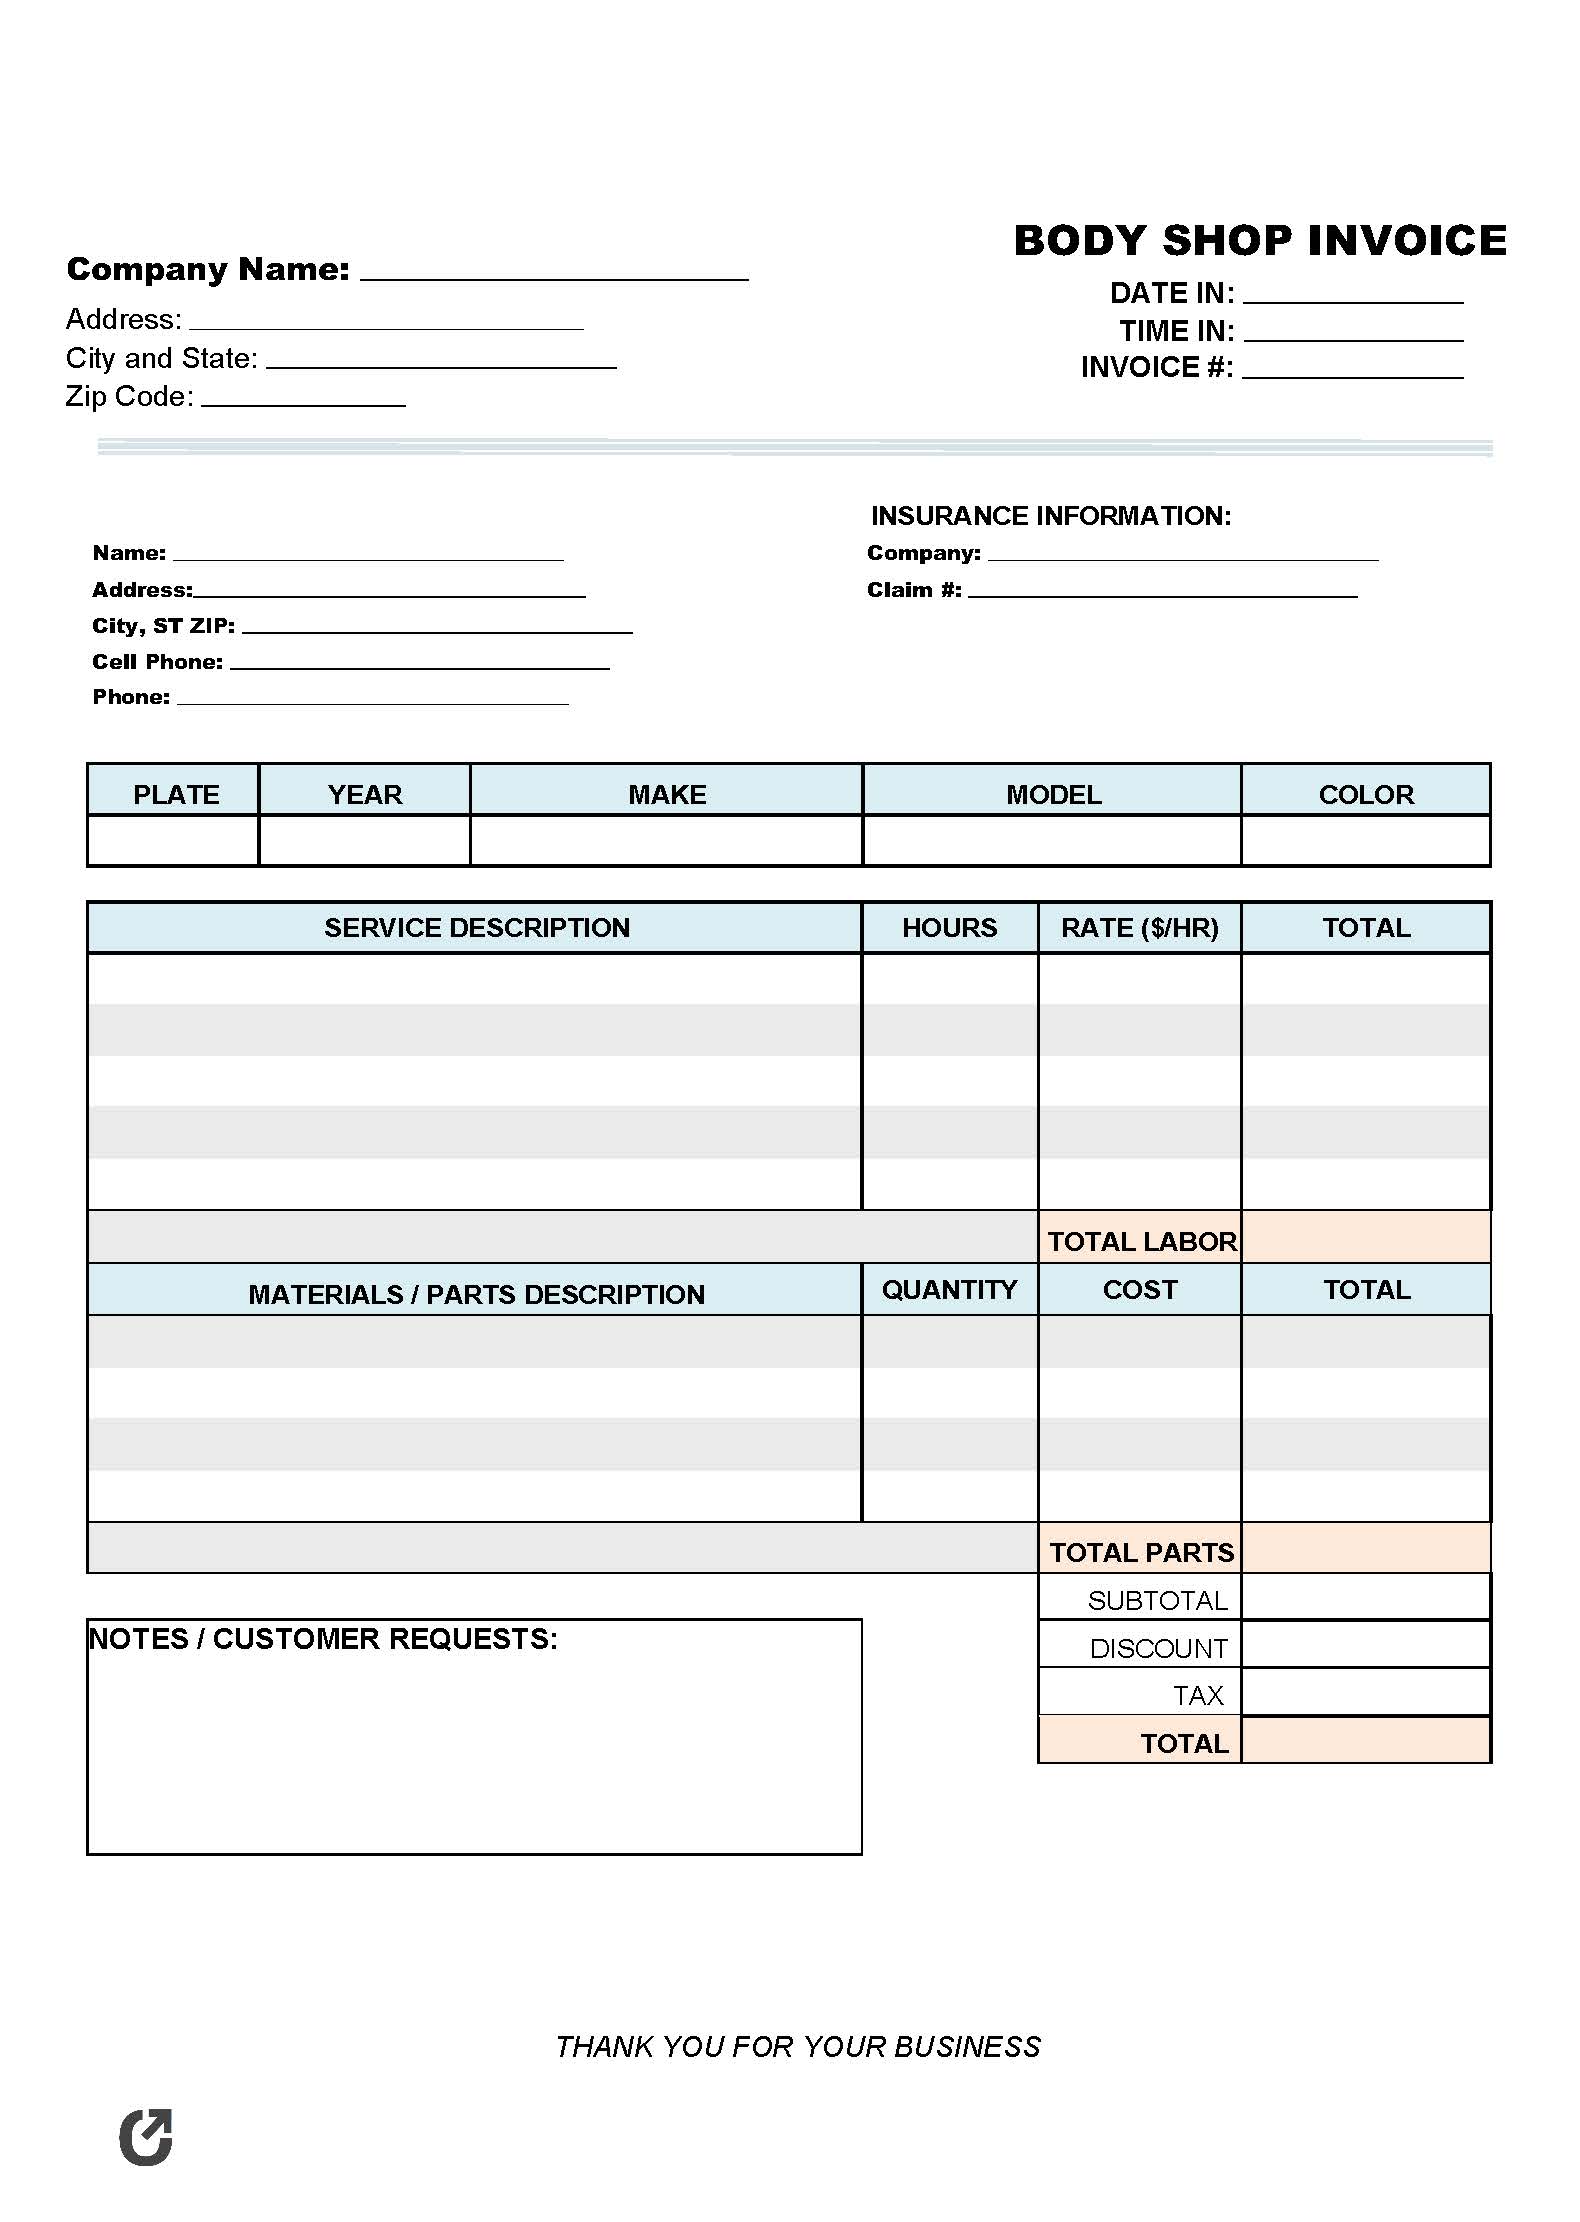 Free Body Shop Invoice Template  PDF  WORD  EXCEL In Parts And Labor Invoice Template Free